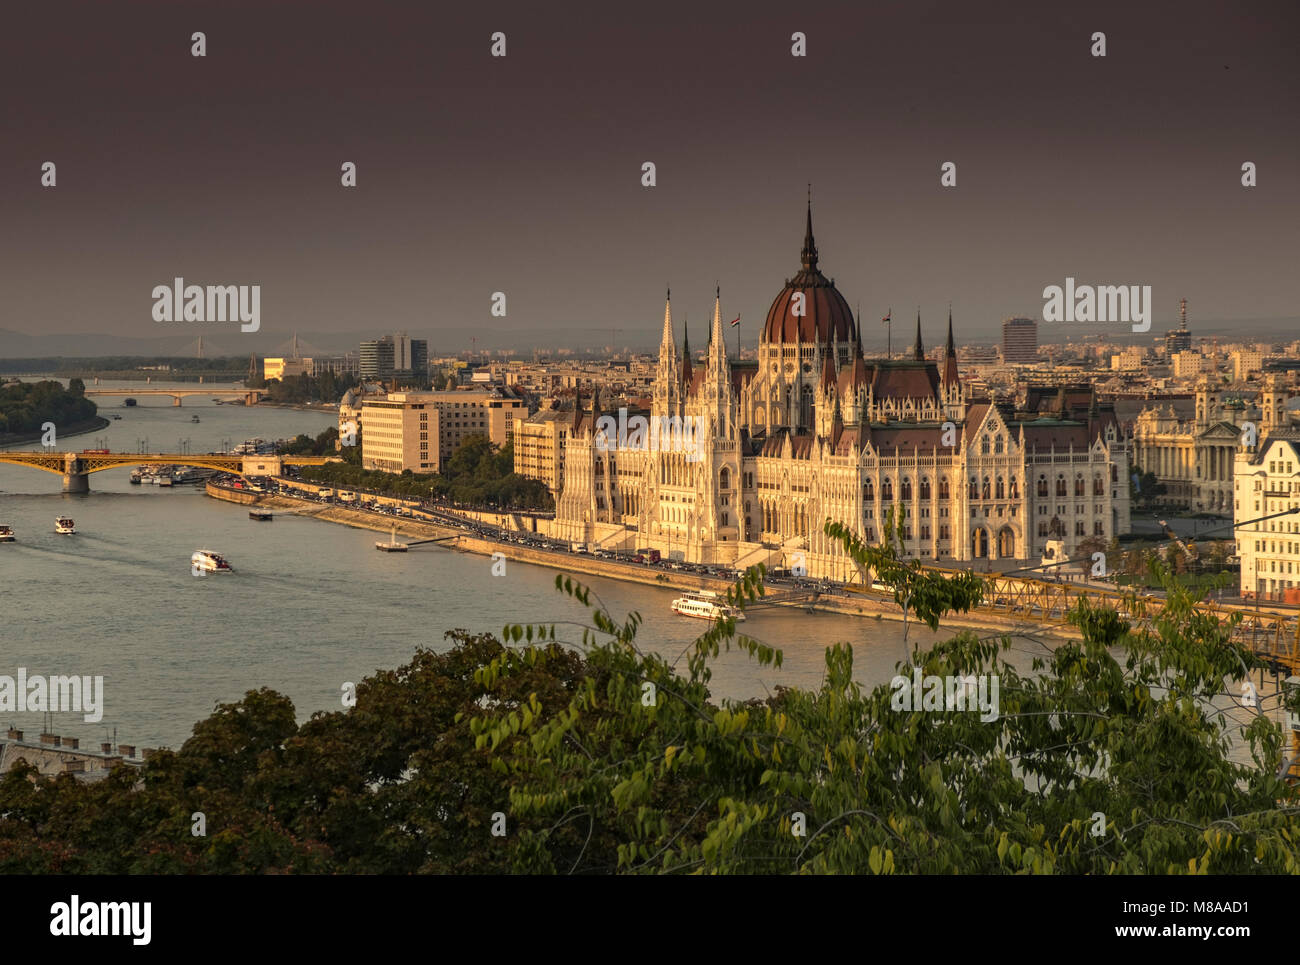 Wide shot of the River Danube and Hungarian parliament seen from Buda Castle. Many boats on river. Taken at dusk Stock Photo